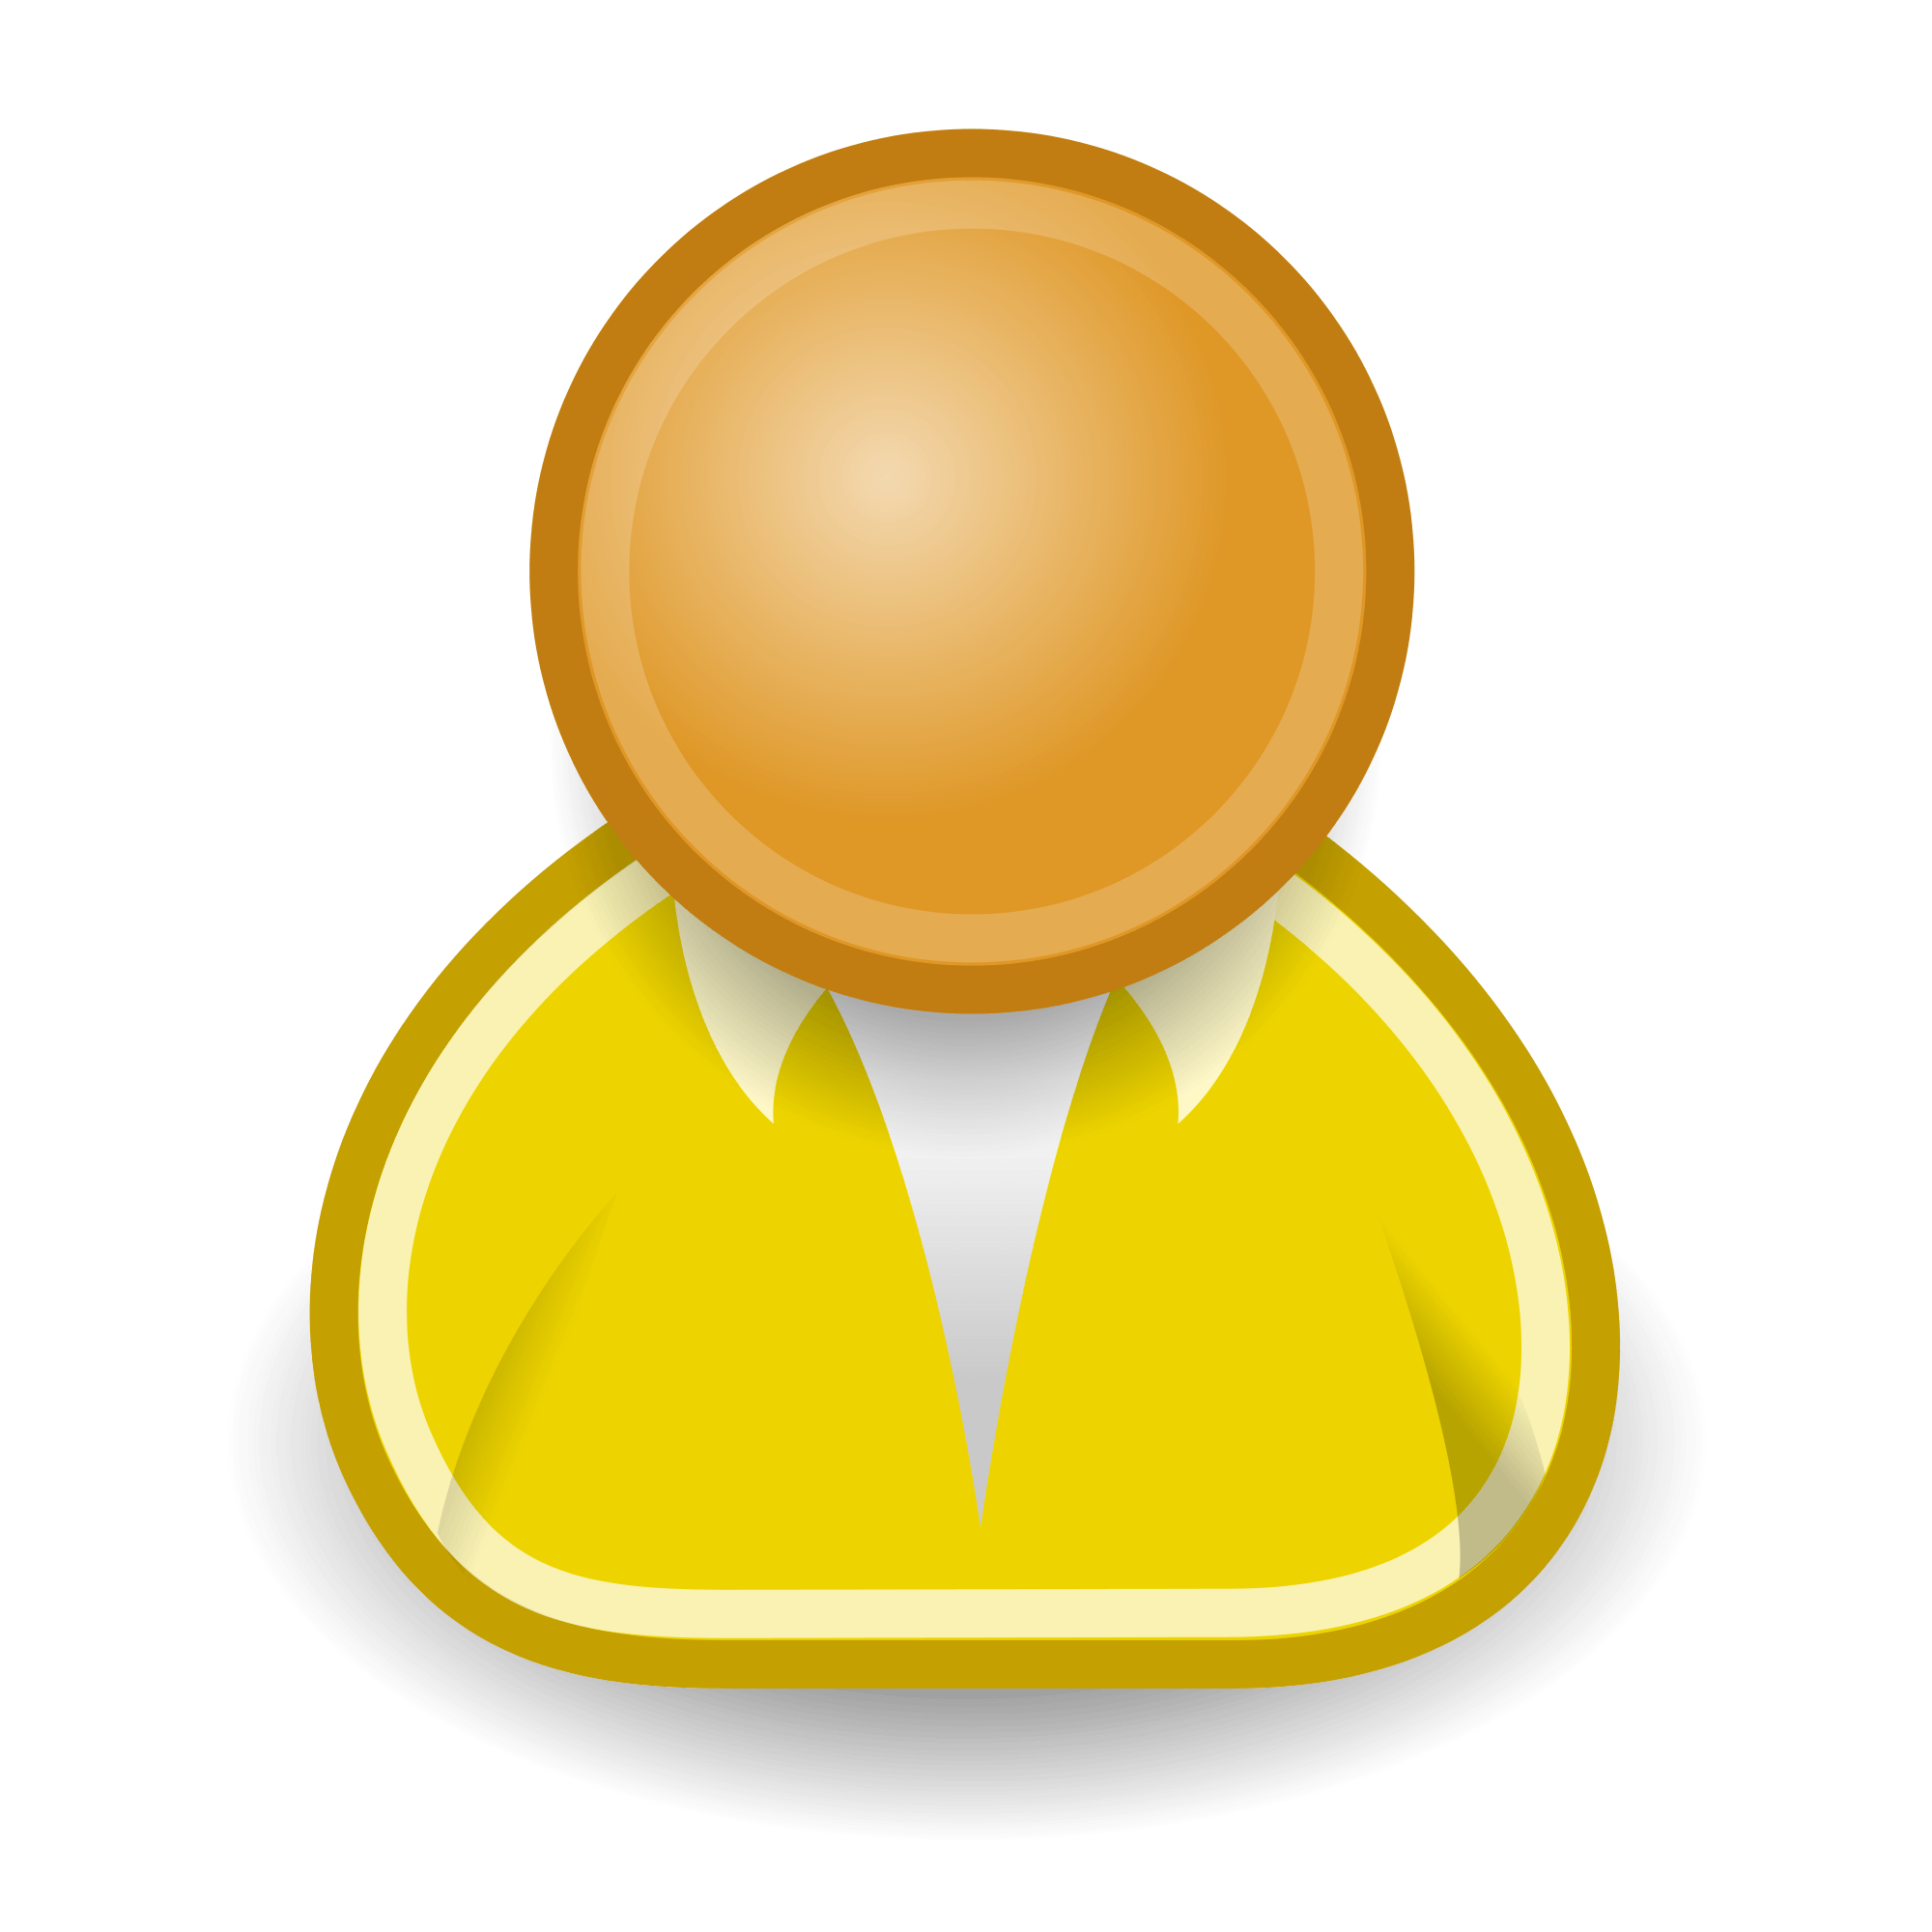 Yellow Person Logo - File:Emblem-person-yellow.svg - Wikimedia Commons